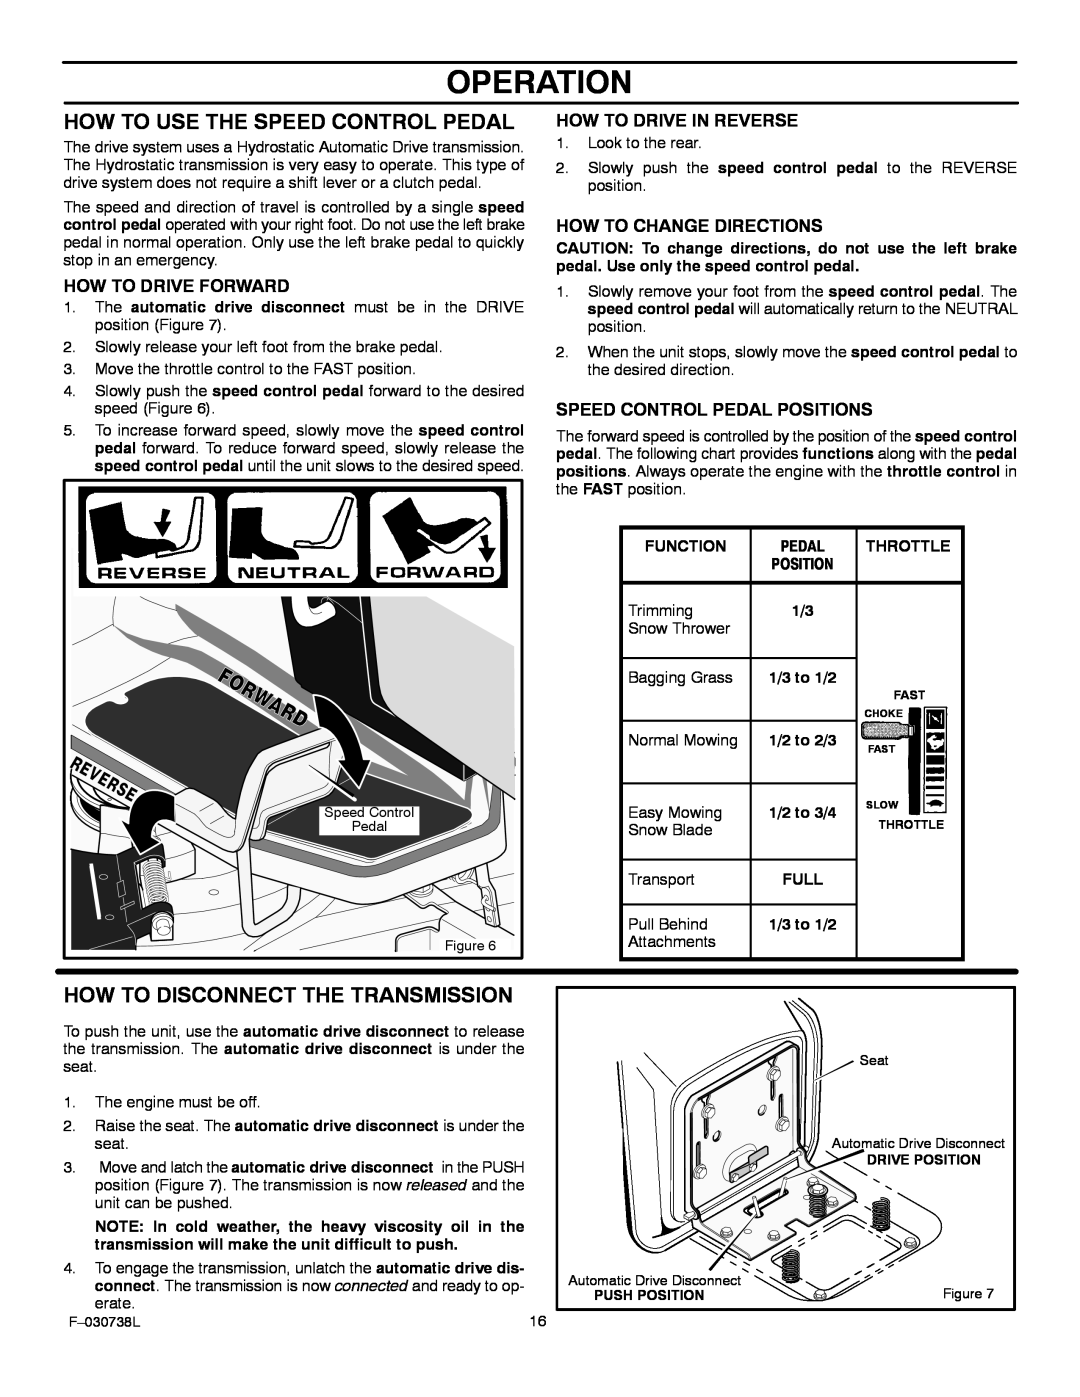 Murray 425603x99A Operation, How To Use The Speed Control Pedal, How To Disconnect The Transmission, How To Drive Forward 